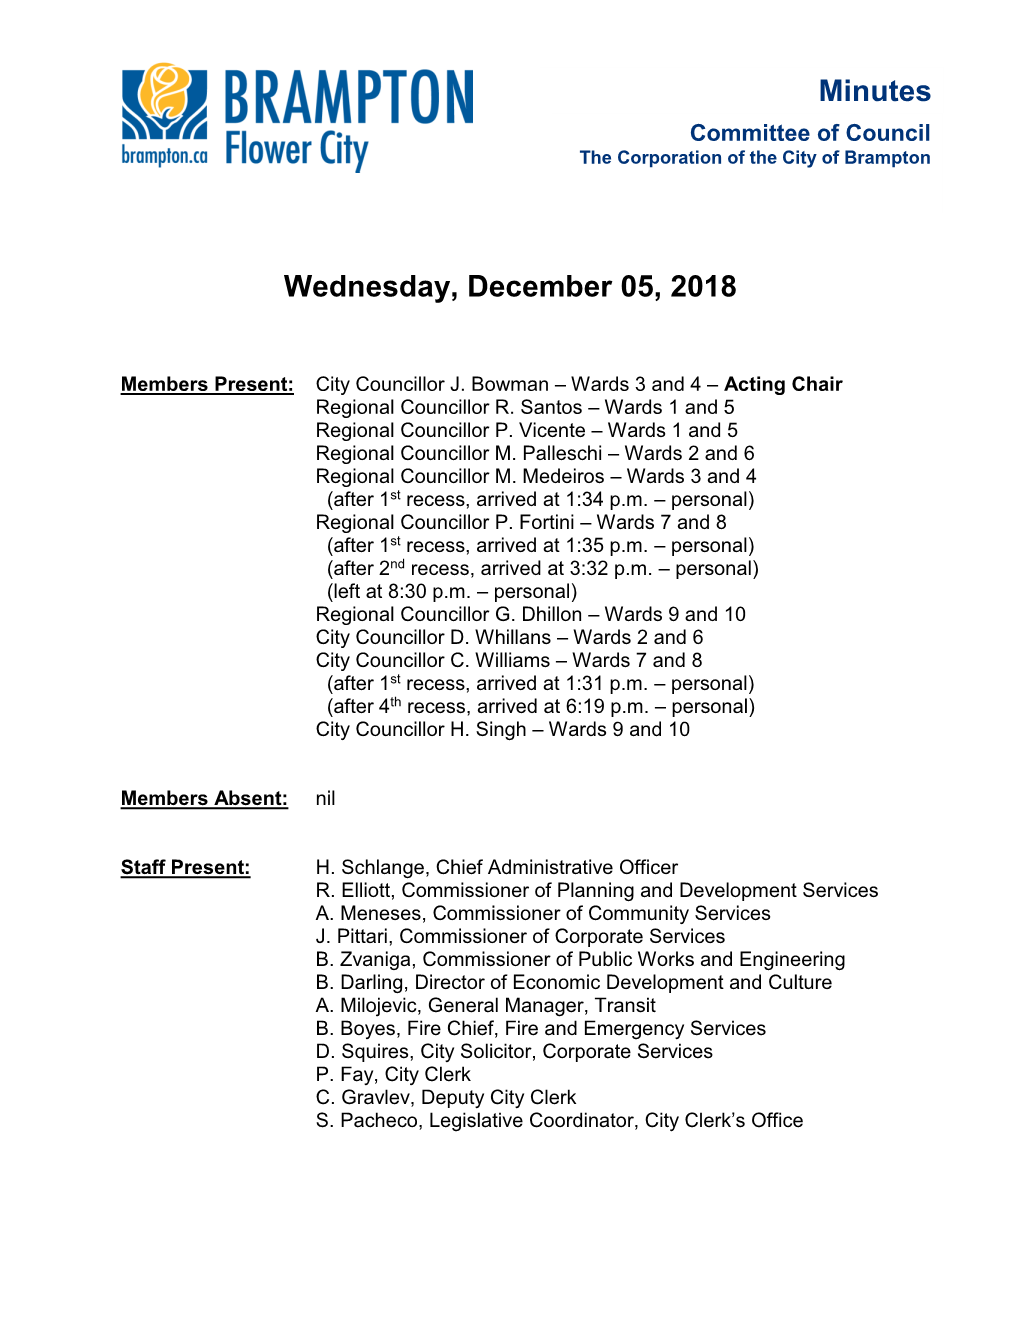 Committee of Council Minutes for December 5, 2018